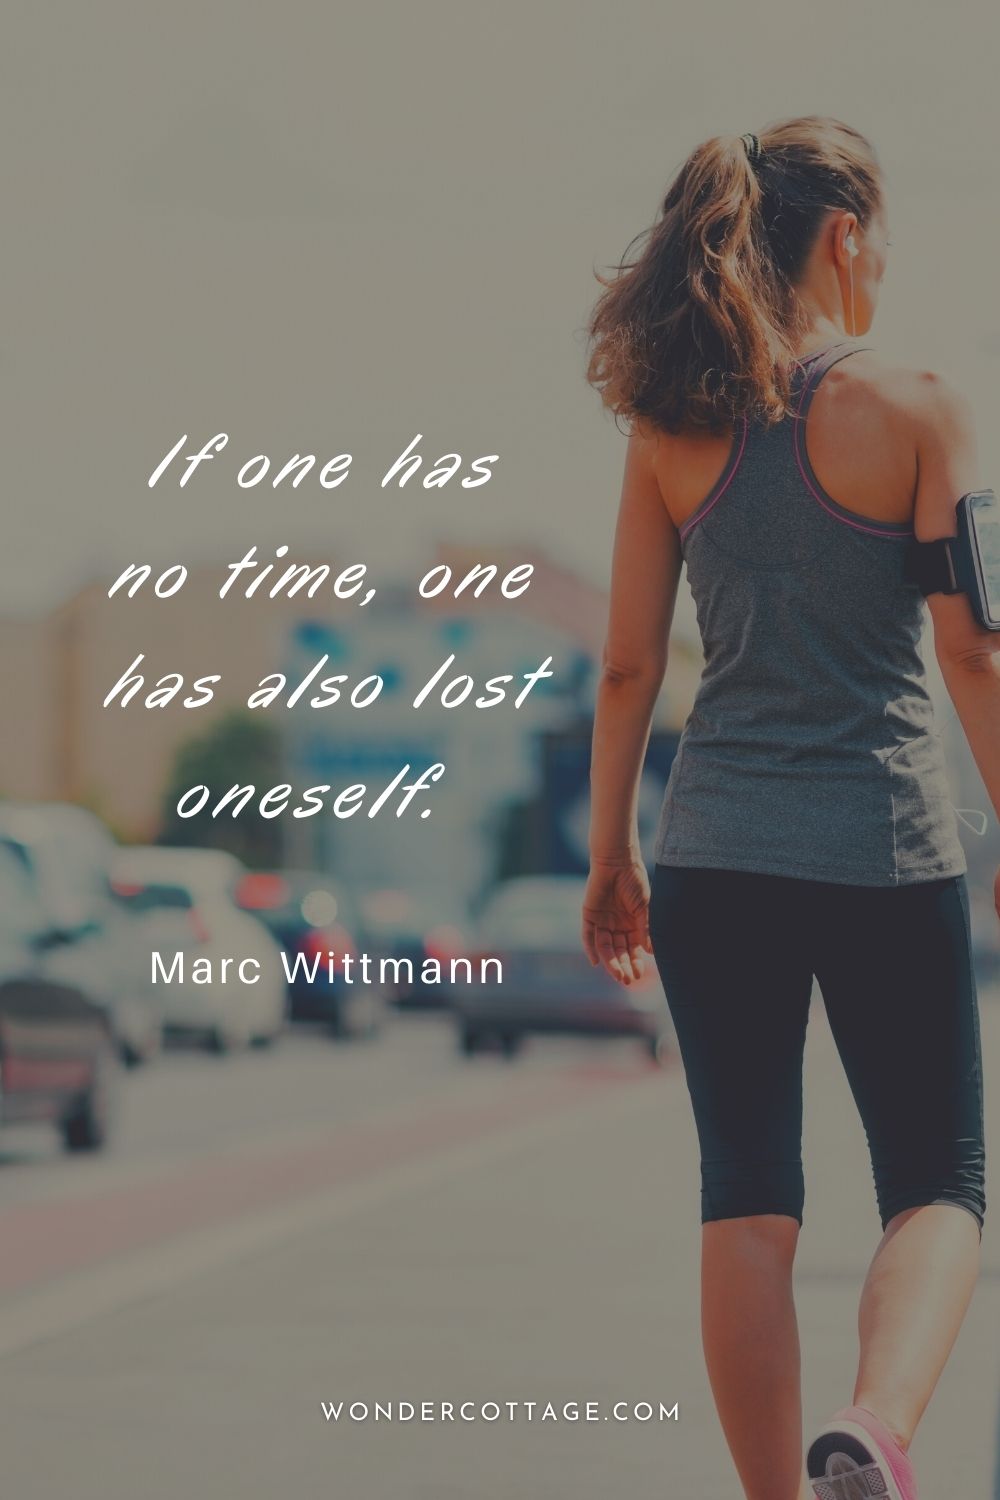 If one has no time, one has also lost oneself.  Marc Wittmann